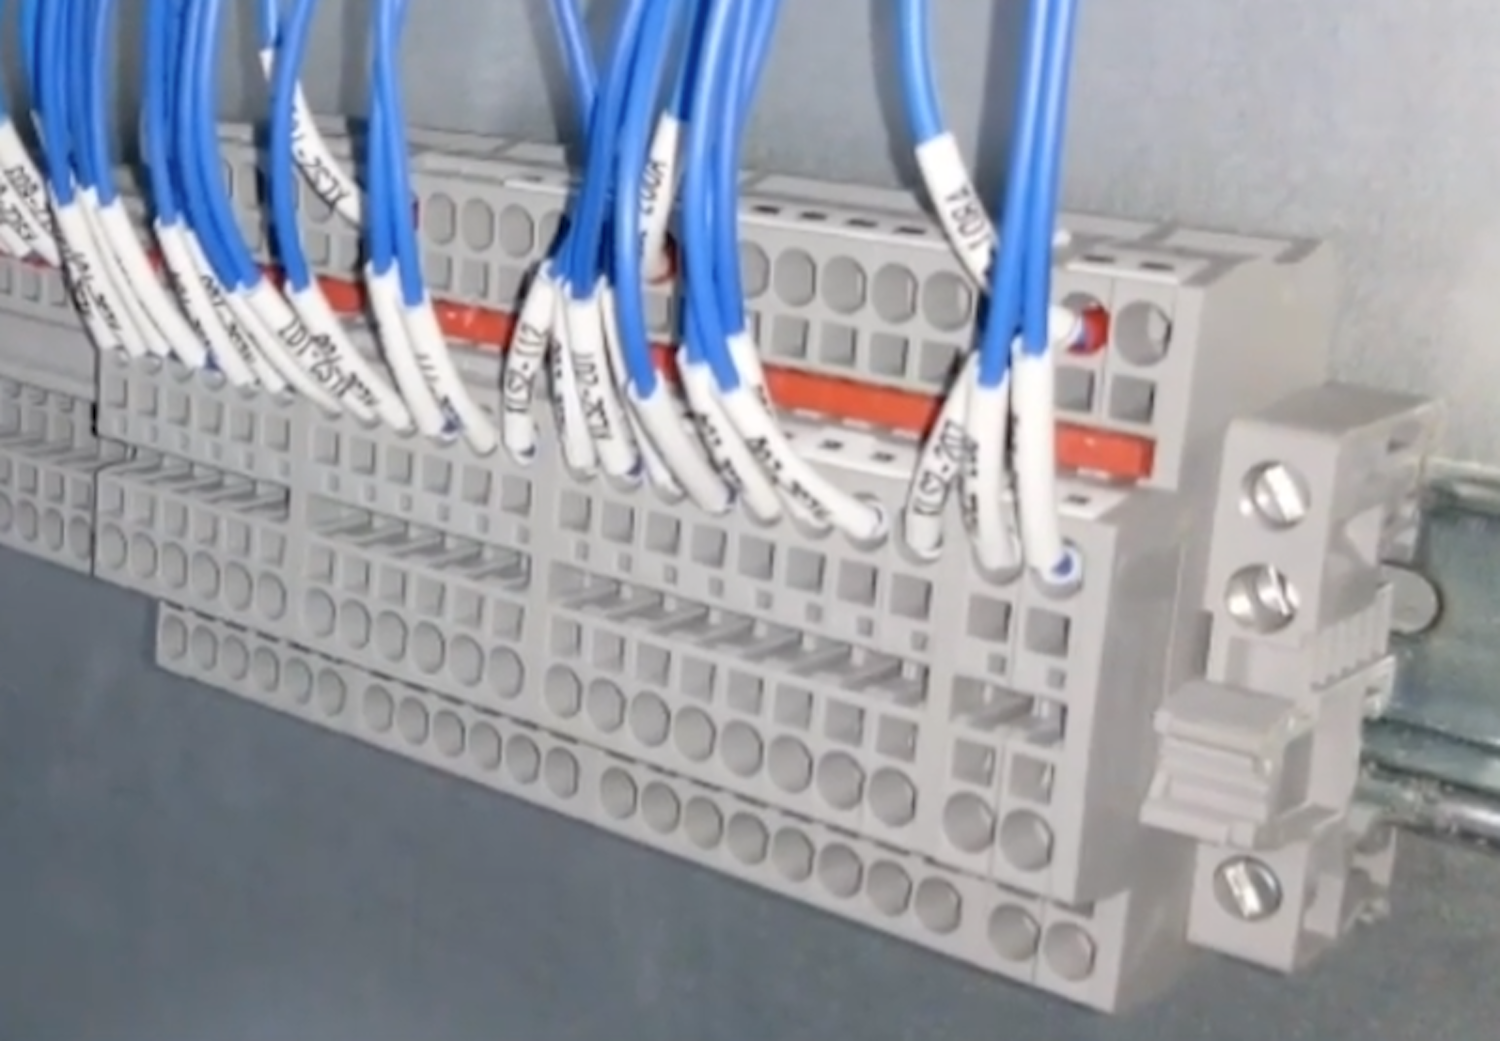 Terminal block with multiple wires connected